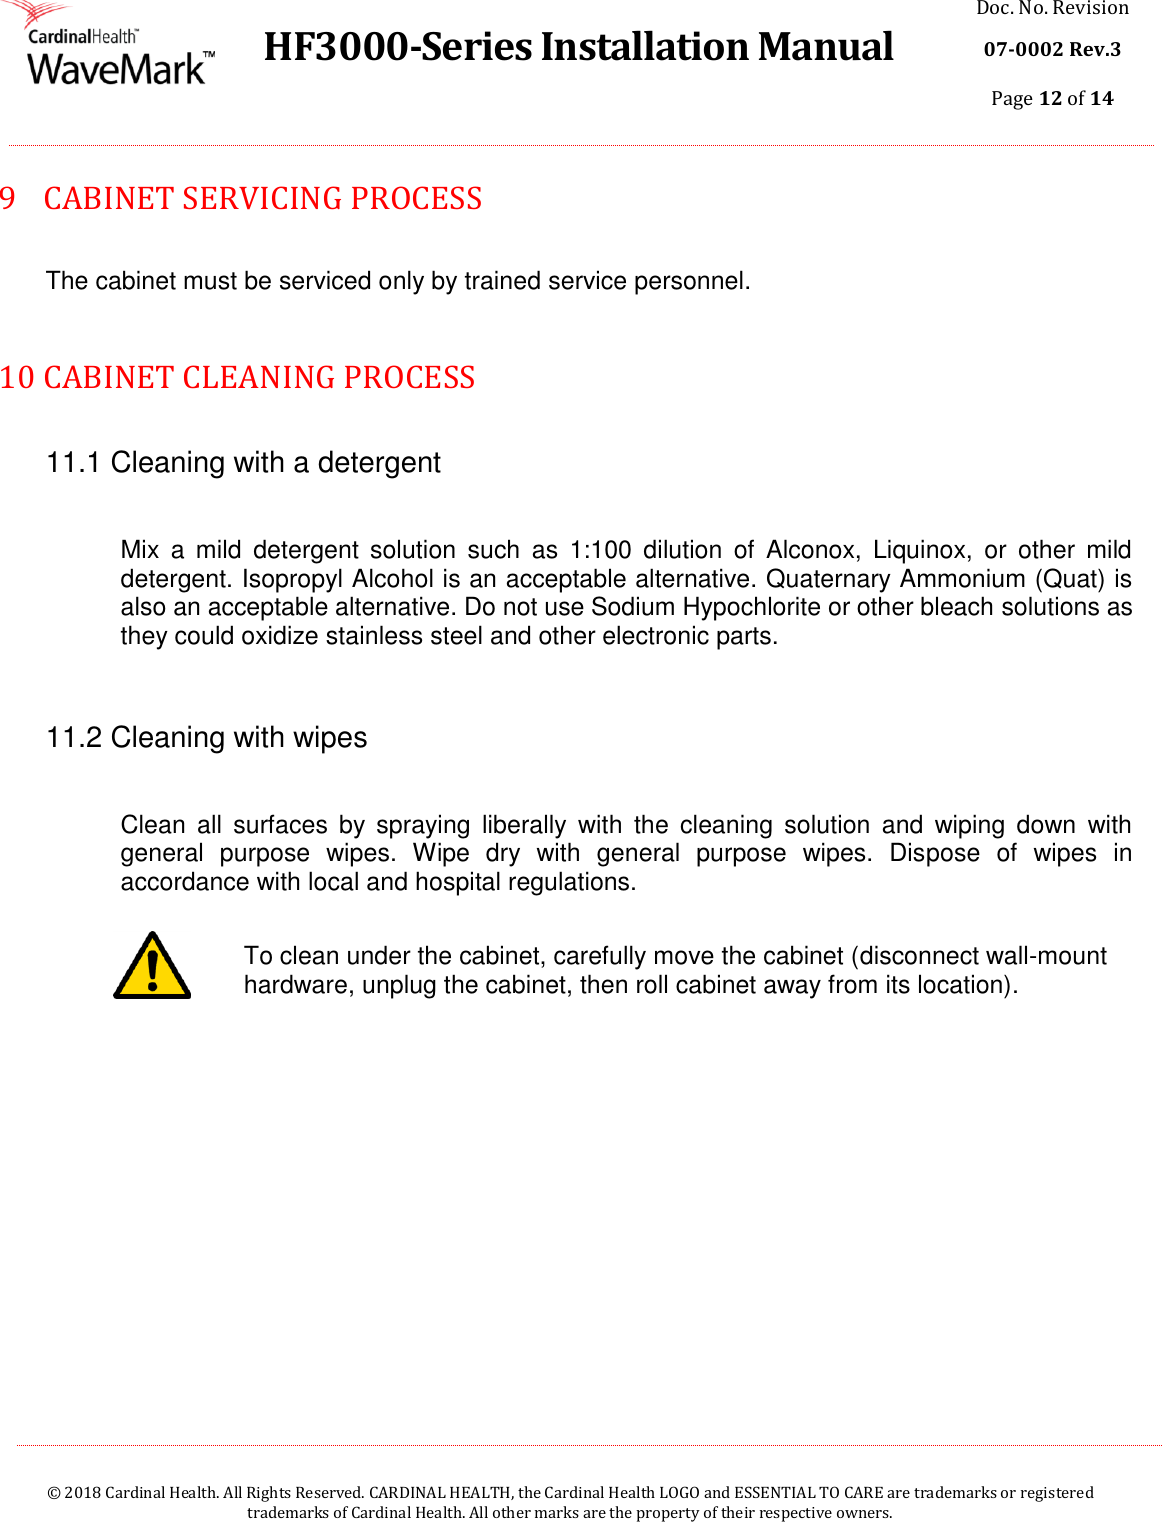  HF3000-Series Installation Manual Doc. No. Revision 07-0002 Rev.3 Page 12 of 14    © 2018 Cardinal Health. All Rights Reserved. CARDINAL HEALTH, the Cardinal Health LOGO and ESSENTIAL TO CARE are trademarks or registered trademarks of Cardinal Health. All other marks are the property of their respective owners.  9  CABINET SERVICING PROCESS  The cabinet must be serviced only by trained service personnel.  10  CABINET CLEANING PROCESS  11.1 Cleaning with a detergent  Mix  a  mild  detergent  solution  such  as  1:100  dilution  of  Alconox,  Liquinox,  or  other  mild detergent. Isopropyl Alcohol is an acceptable alternative. Quaternary Ammonium (Quat) is also an acceptable alternative. Do not use Sodium Hypochlorite or other bleach solutions as they could oxidize stainless steel and other electronic parts.  11.2 Cleaning with wipes  Clean  all  surfaces  by  spraying  liberally  with  the  cleaning  solution  and  wiping  down  with general  purpose  wipes.  Wipe  dry  with  general  purpose  wipes.  Dispose  of  wipes  in accordance with local and hospital regulations.  To clean under the cabinet, carefully move the cabinet (disconnect wall-mount hardware, unplug the cabinet, then roll cabinet away from its location).     